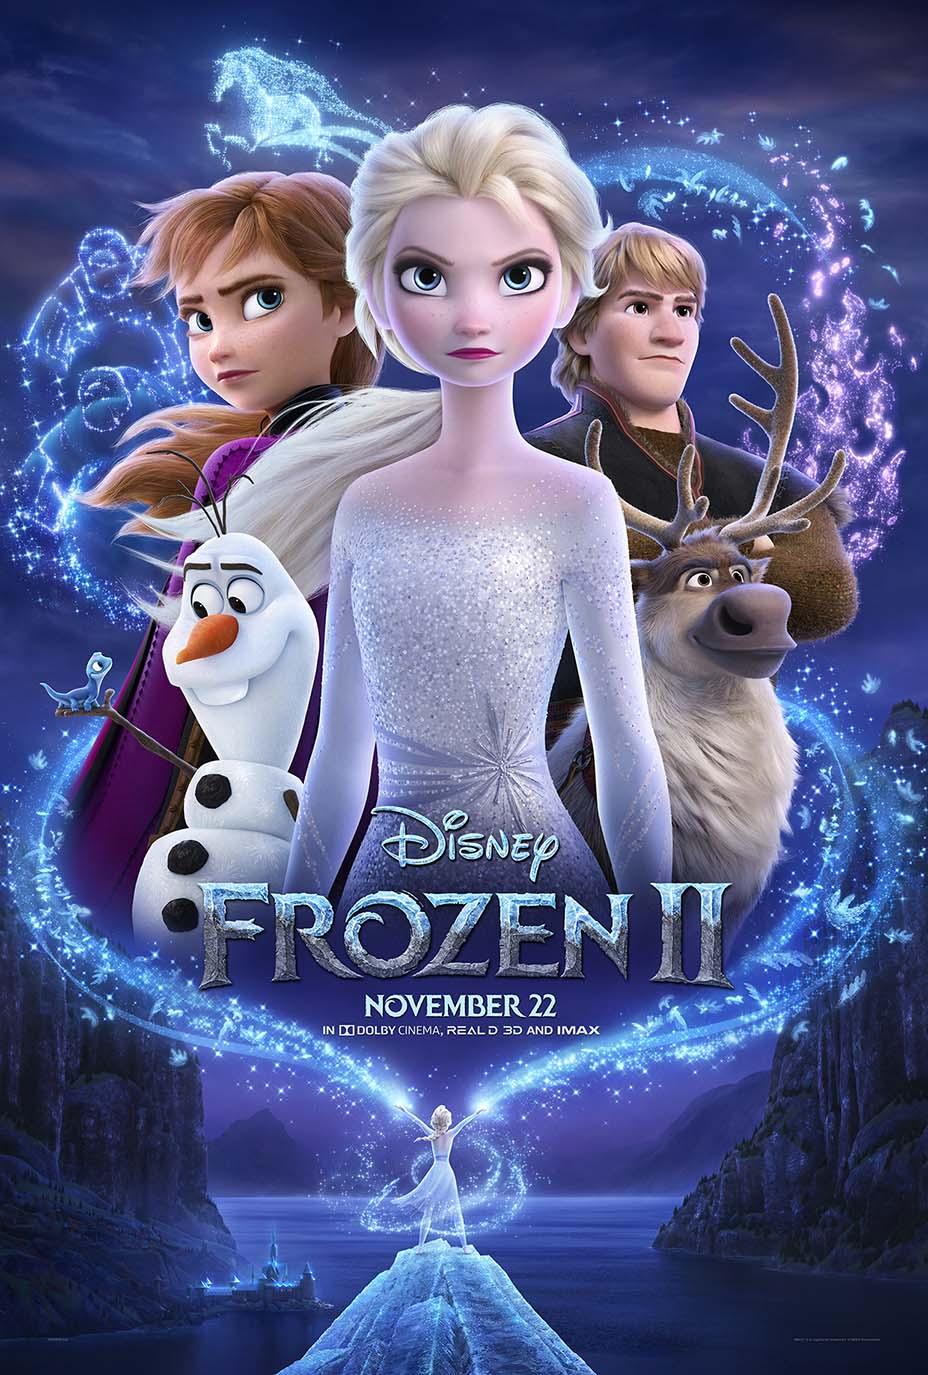 Frozen 2 New Poster the Snow Queen Photo 43029323